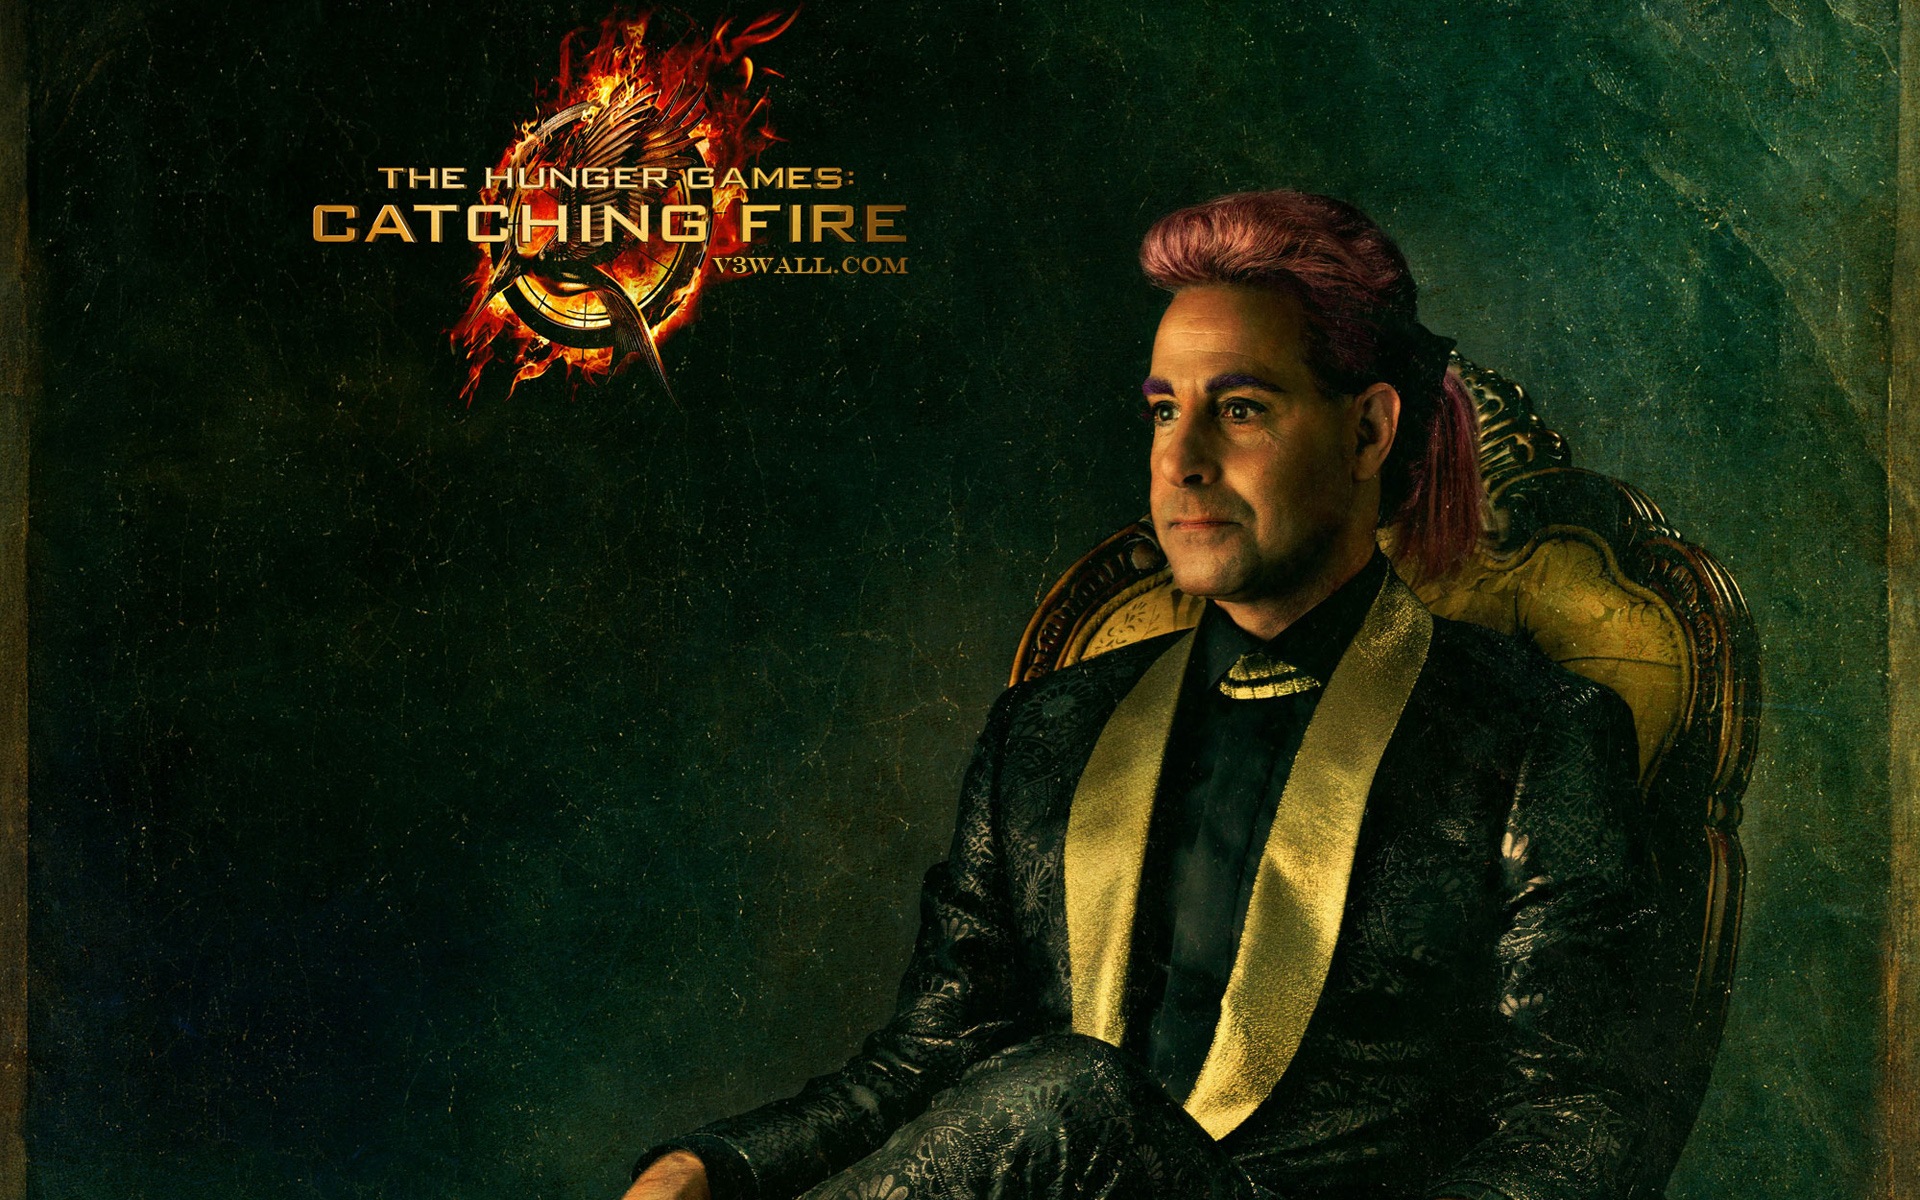 The Hunger Games: Catching Fire wallpapers HD #15 - 1920x1200